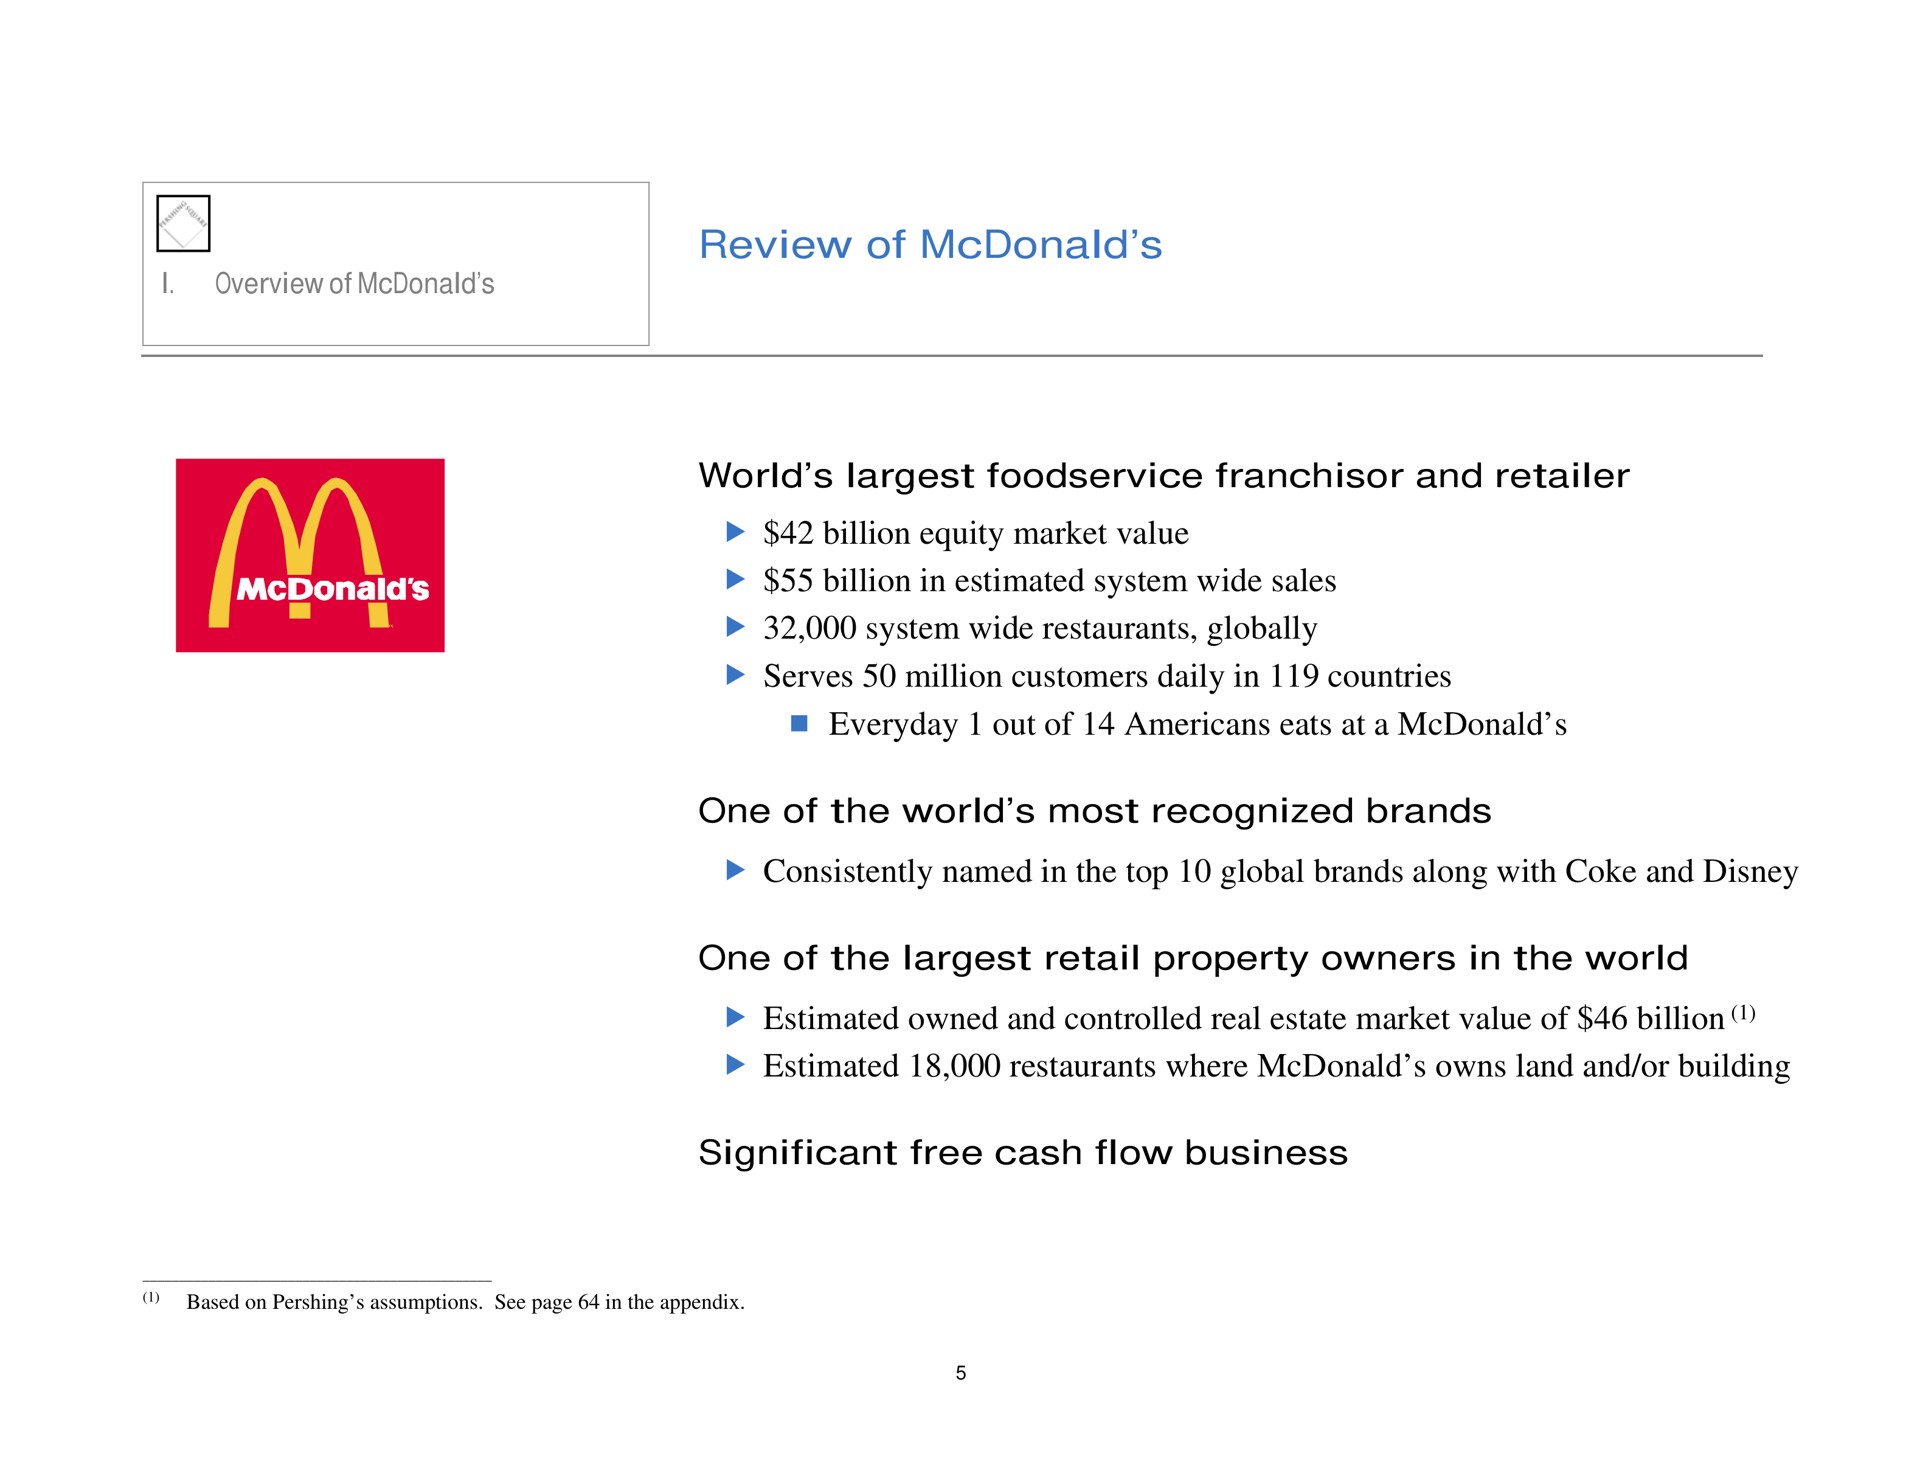 review of world and retailer billion equity market value billion in estimated system wide sales system wide restaurants globally serves million customers daily in countries everyday out of eats at a one of the world most recognized brands consistently named in the top global brands along with coke and one of the retail property owners in the world estimated owned and controlled real estate market value of billion estimated restaurants where owns land and or building significant free cash flow business | Pershing Square